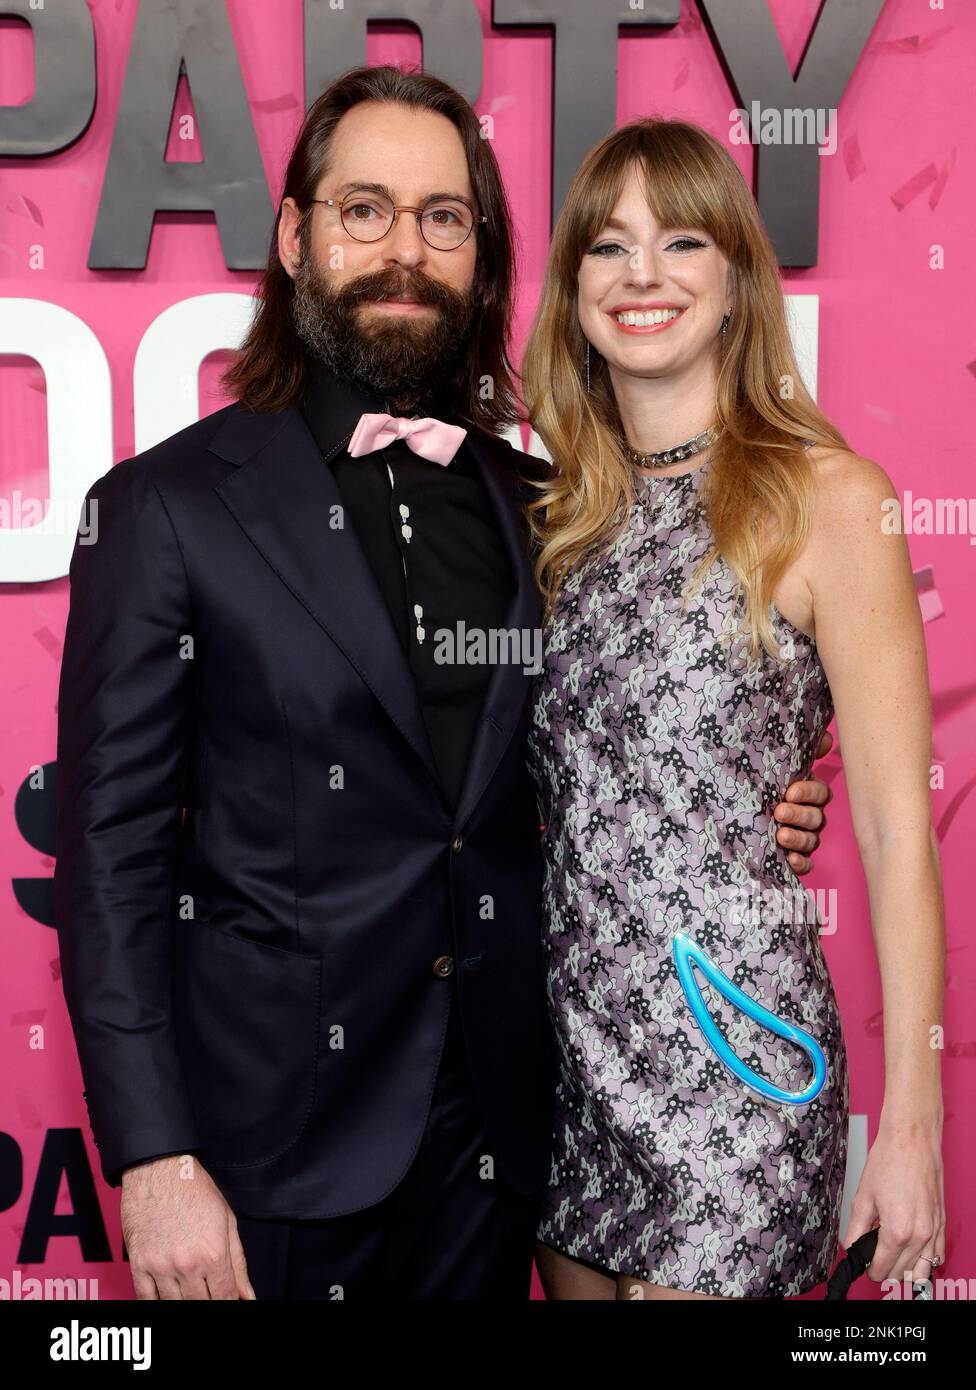 Los Angeles, Ca. 22nd Feb, 2023. Martin Starr, Alex Gehring at the LA  Premiere of STARZ Party Down Season 3 at the Regency Bruin Theatre in Los  Angeles, California on February 22,